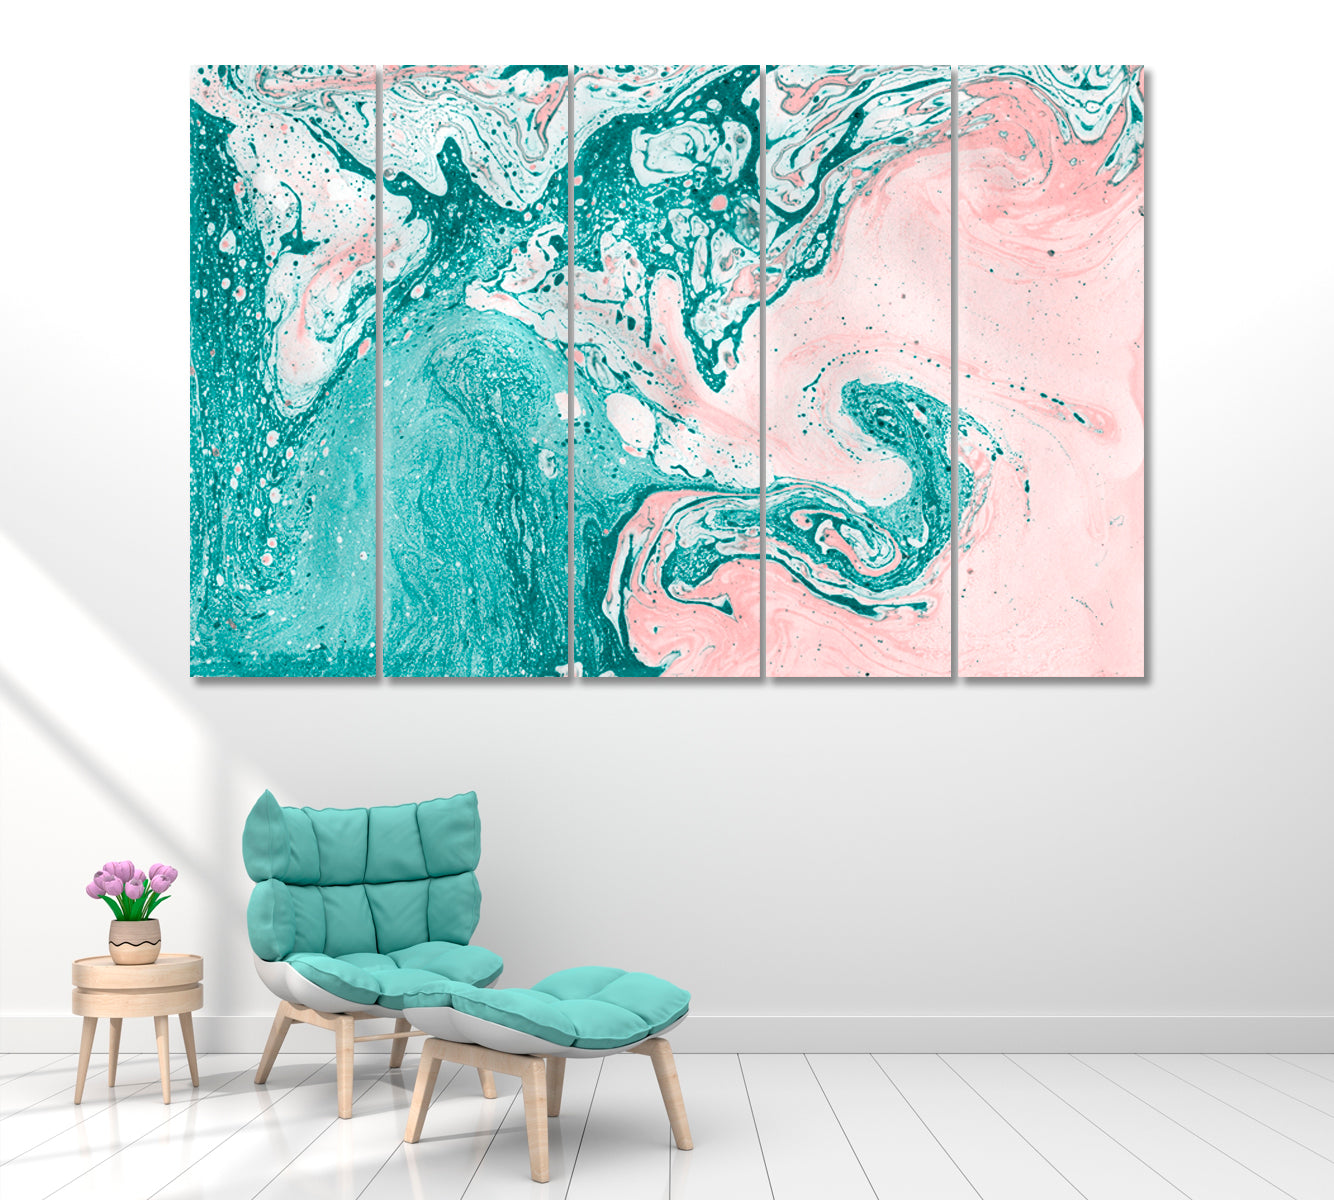 Abstract Turquoise and Pink Marble Painting Canvas Print ArtLexy 5 Panels 36"x24" inches 